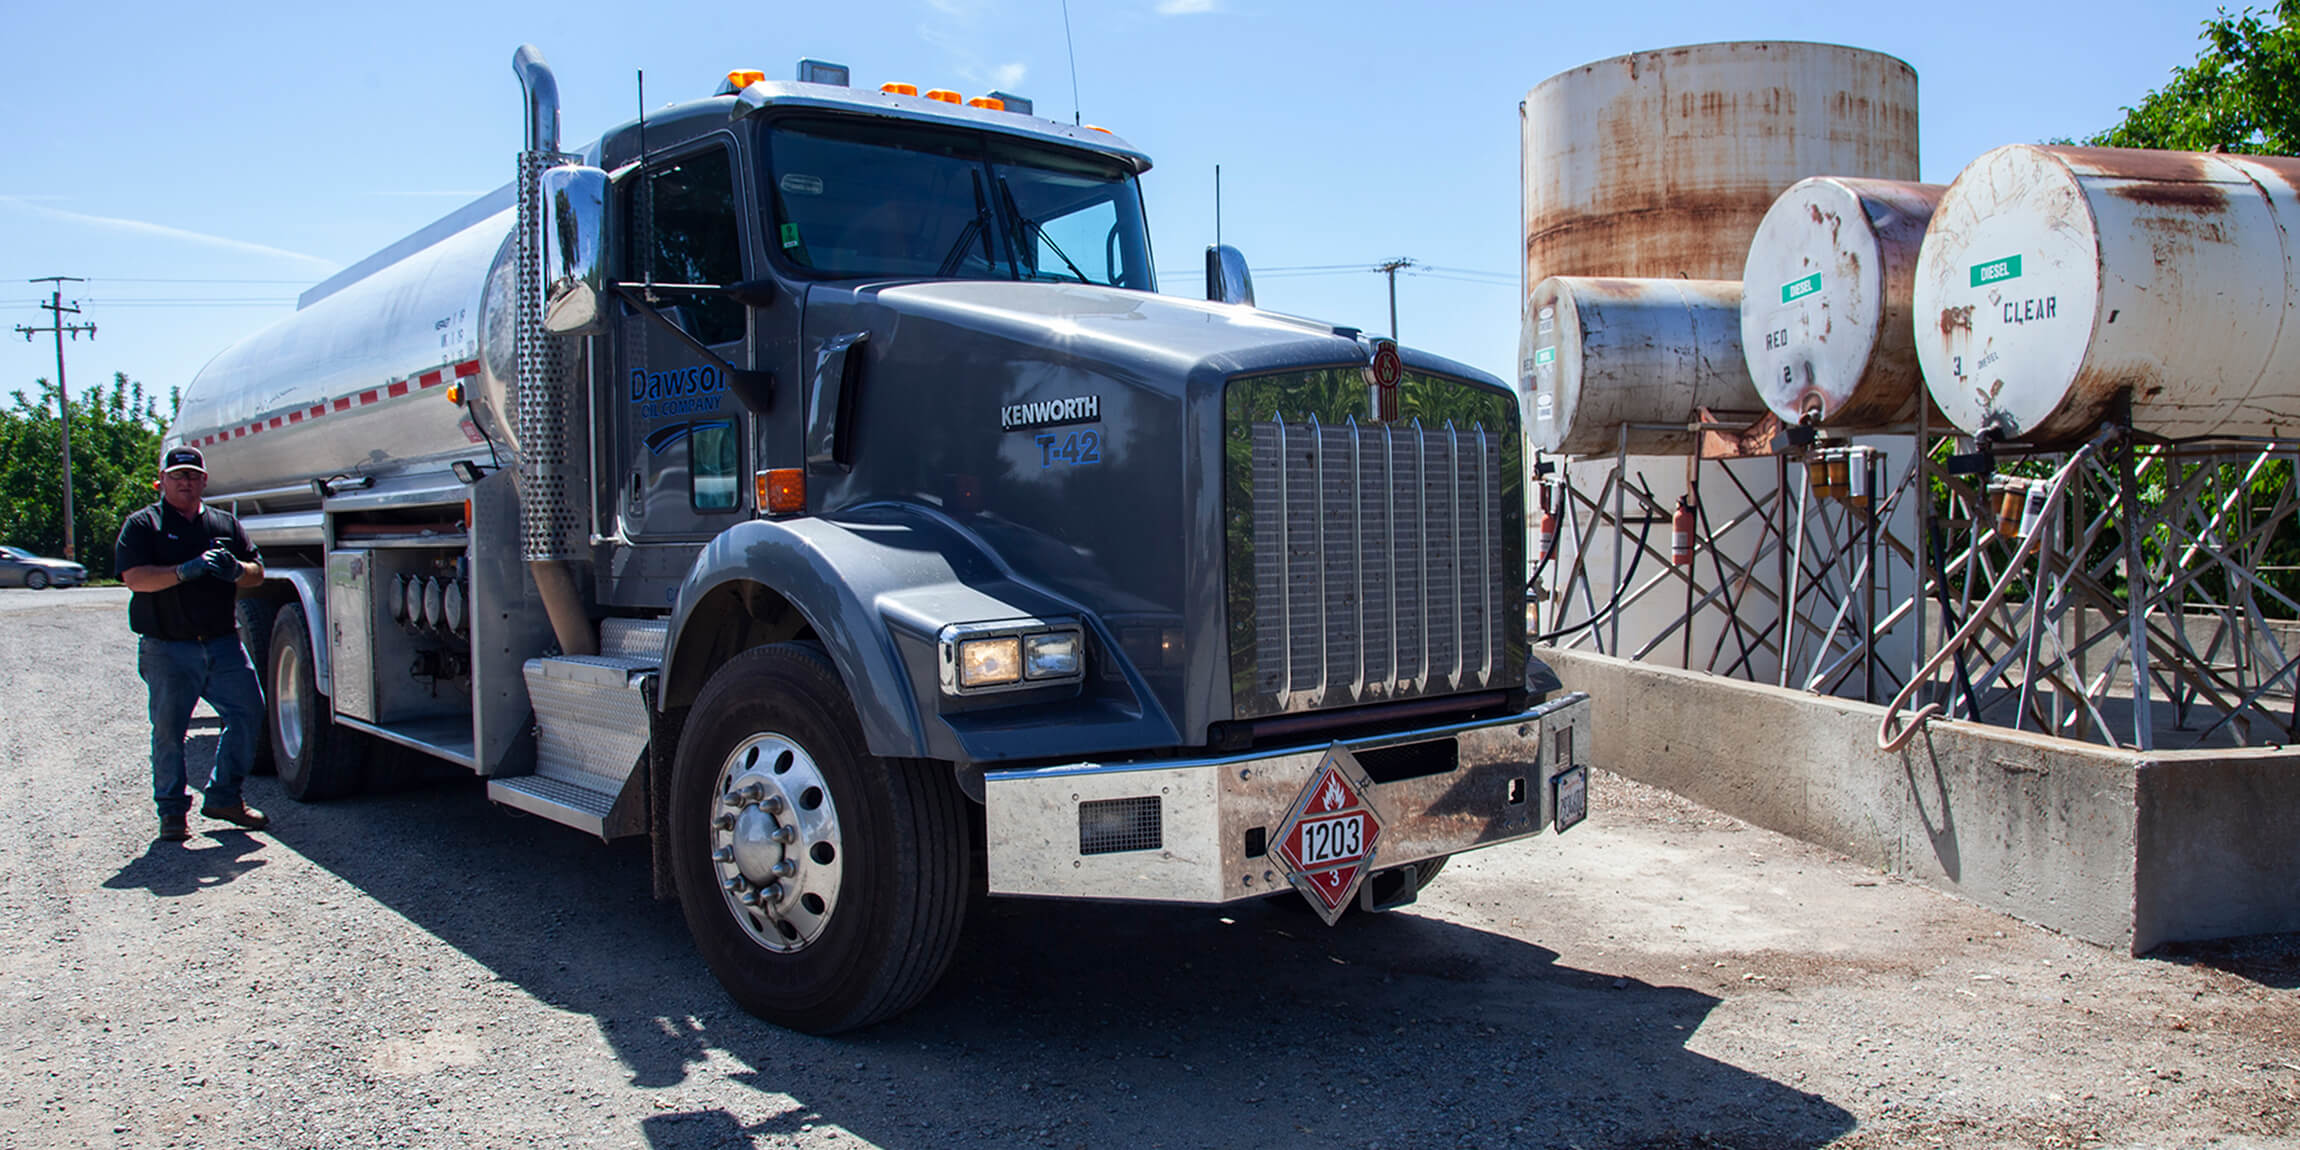 Our STLE-certified technicians can help you figure out what type of fuel you need and we'll deliver a variety of fuels within 24 hours of a phone call.